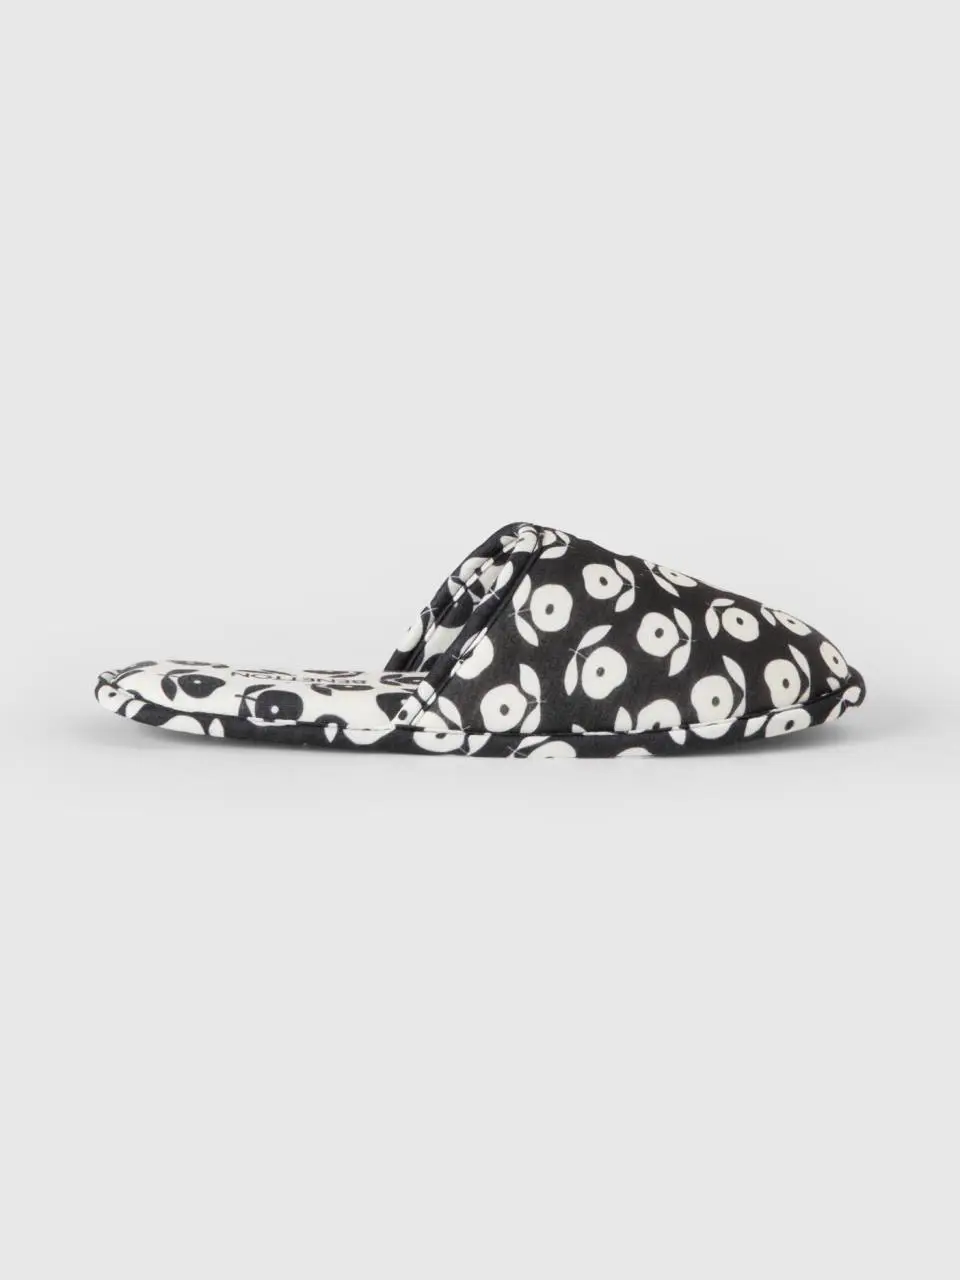 Benetton floral slippers. 1